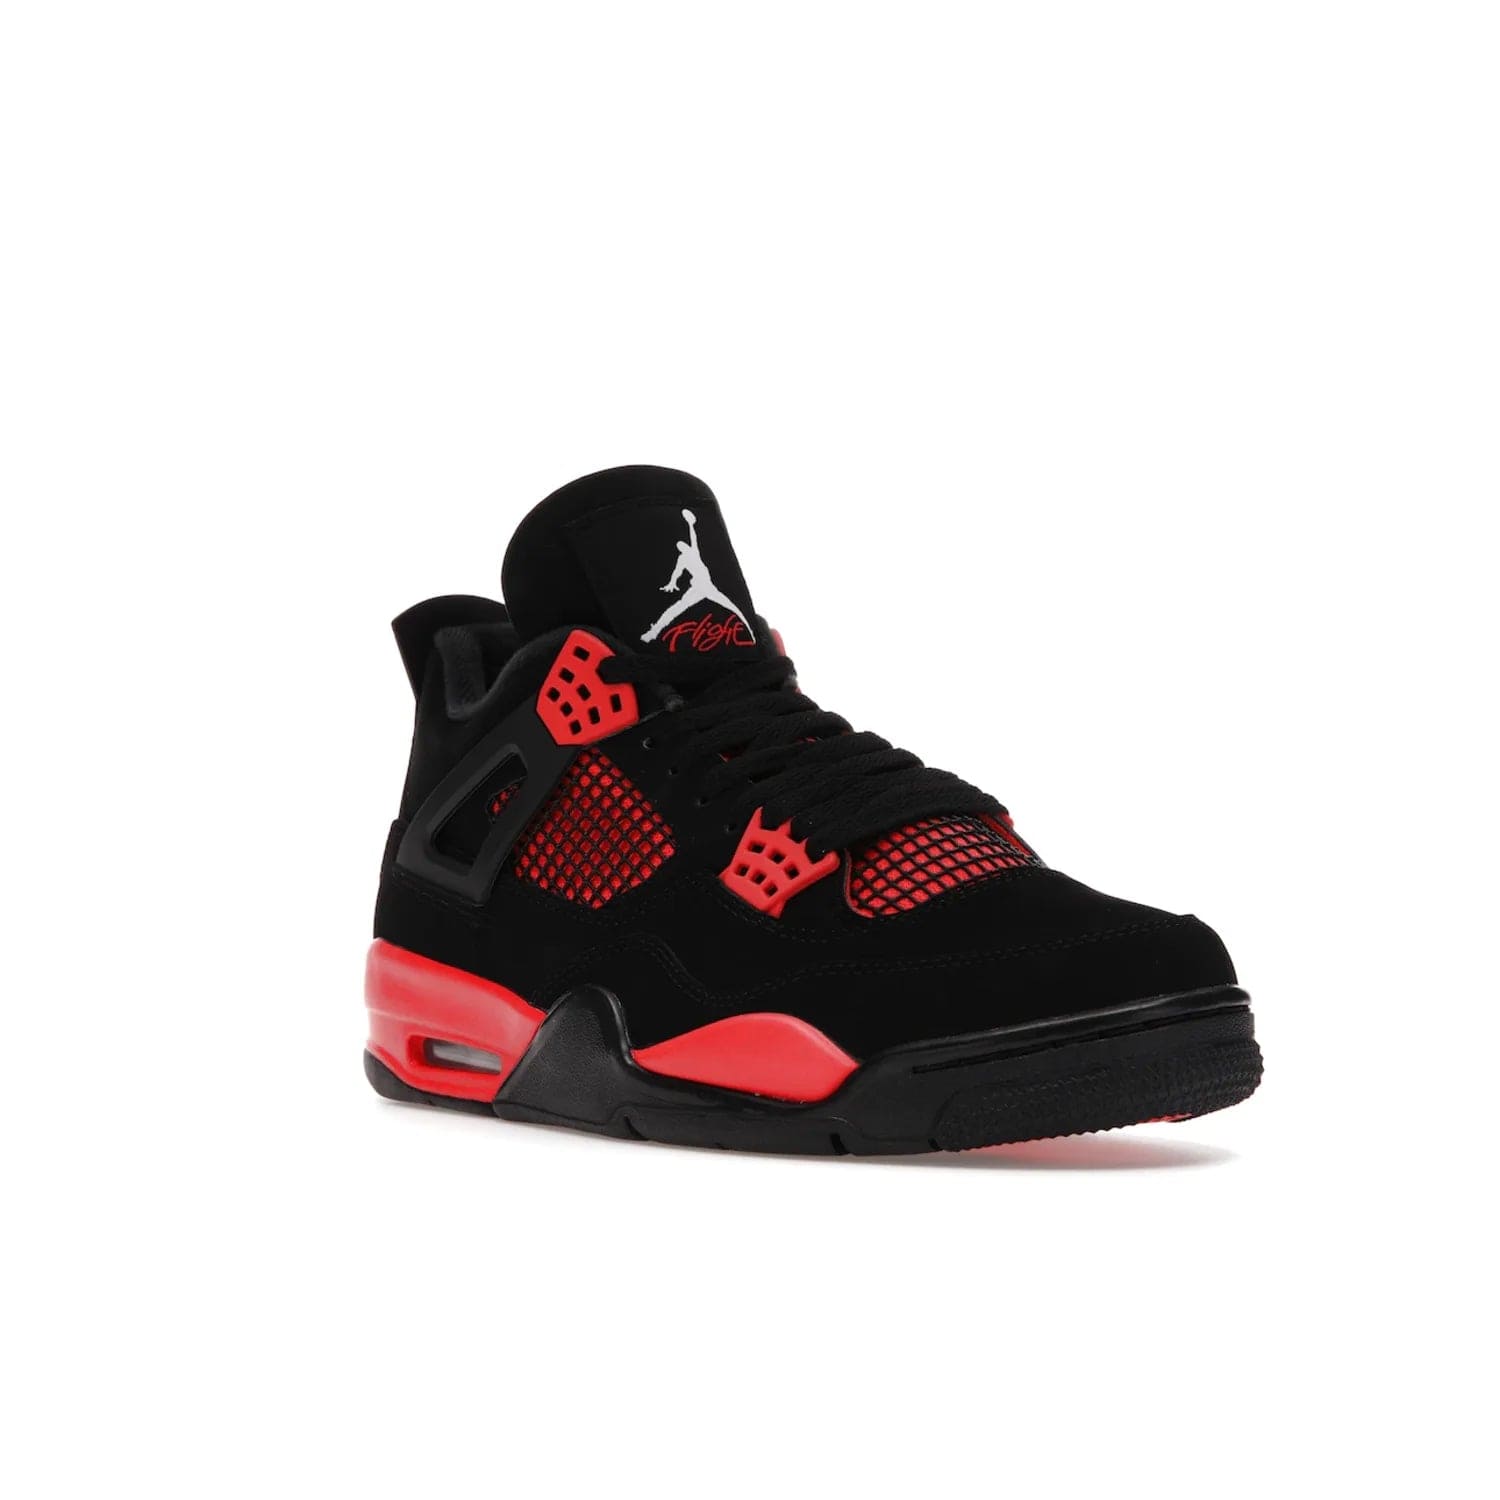 Jordan 4 Retro Red Thunder - Image 6 - Only at www.BallersClubKickz.com - Upscale your footwear with the Air Jordan 4 Retro Red Thunder. Featuring a Durabuck upper, red underlays, signature Flight patch, and vibrant red midsole, this retro sneaker adds style and edge. Releases in January 2022.